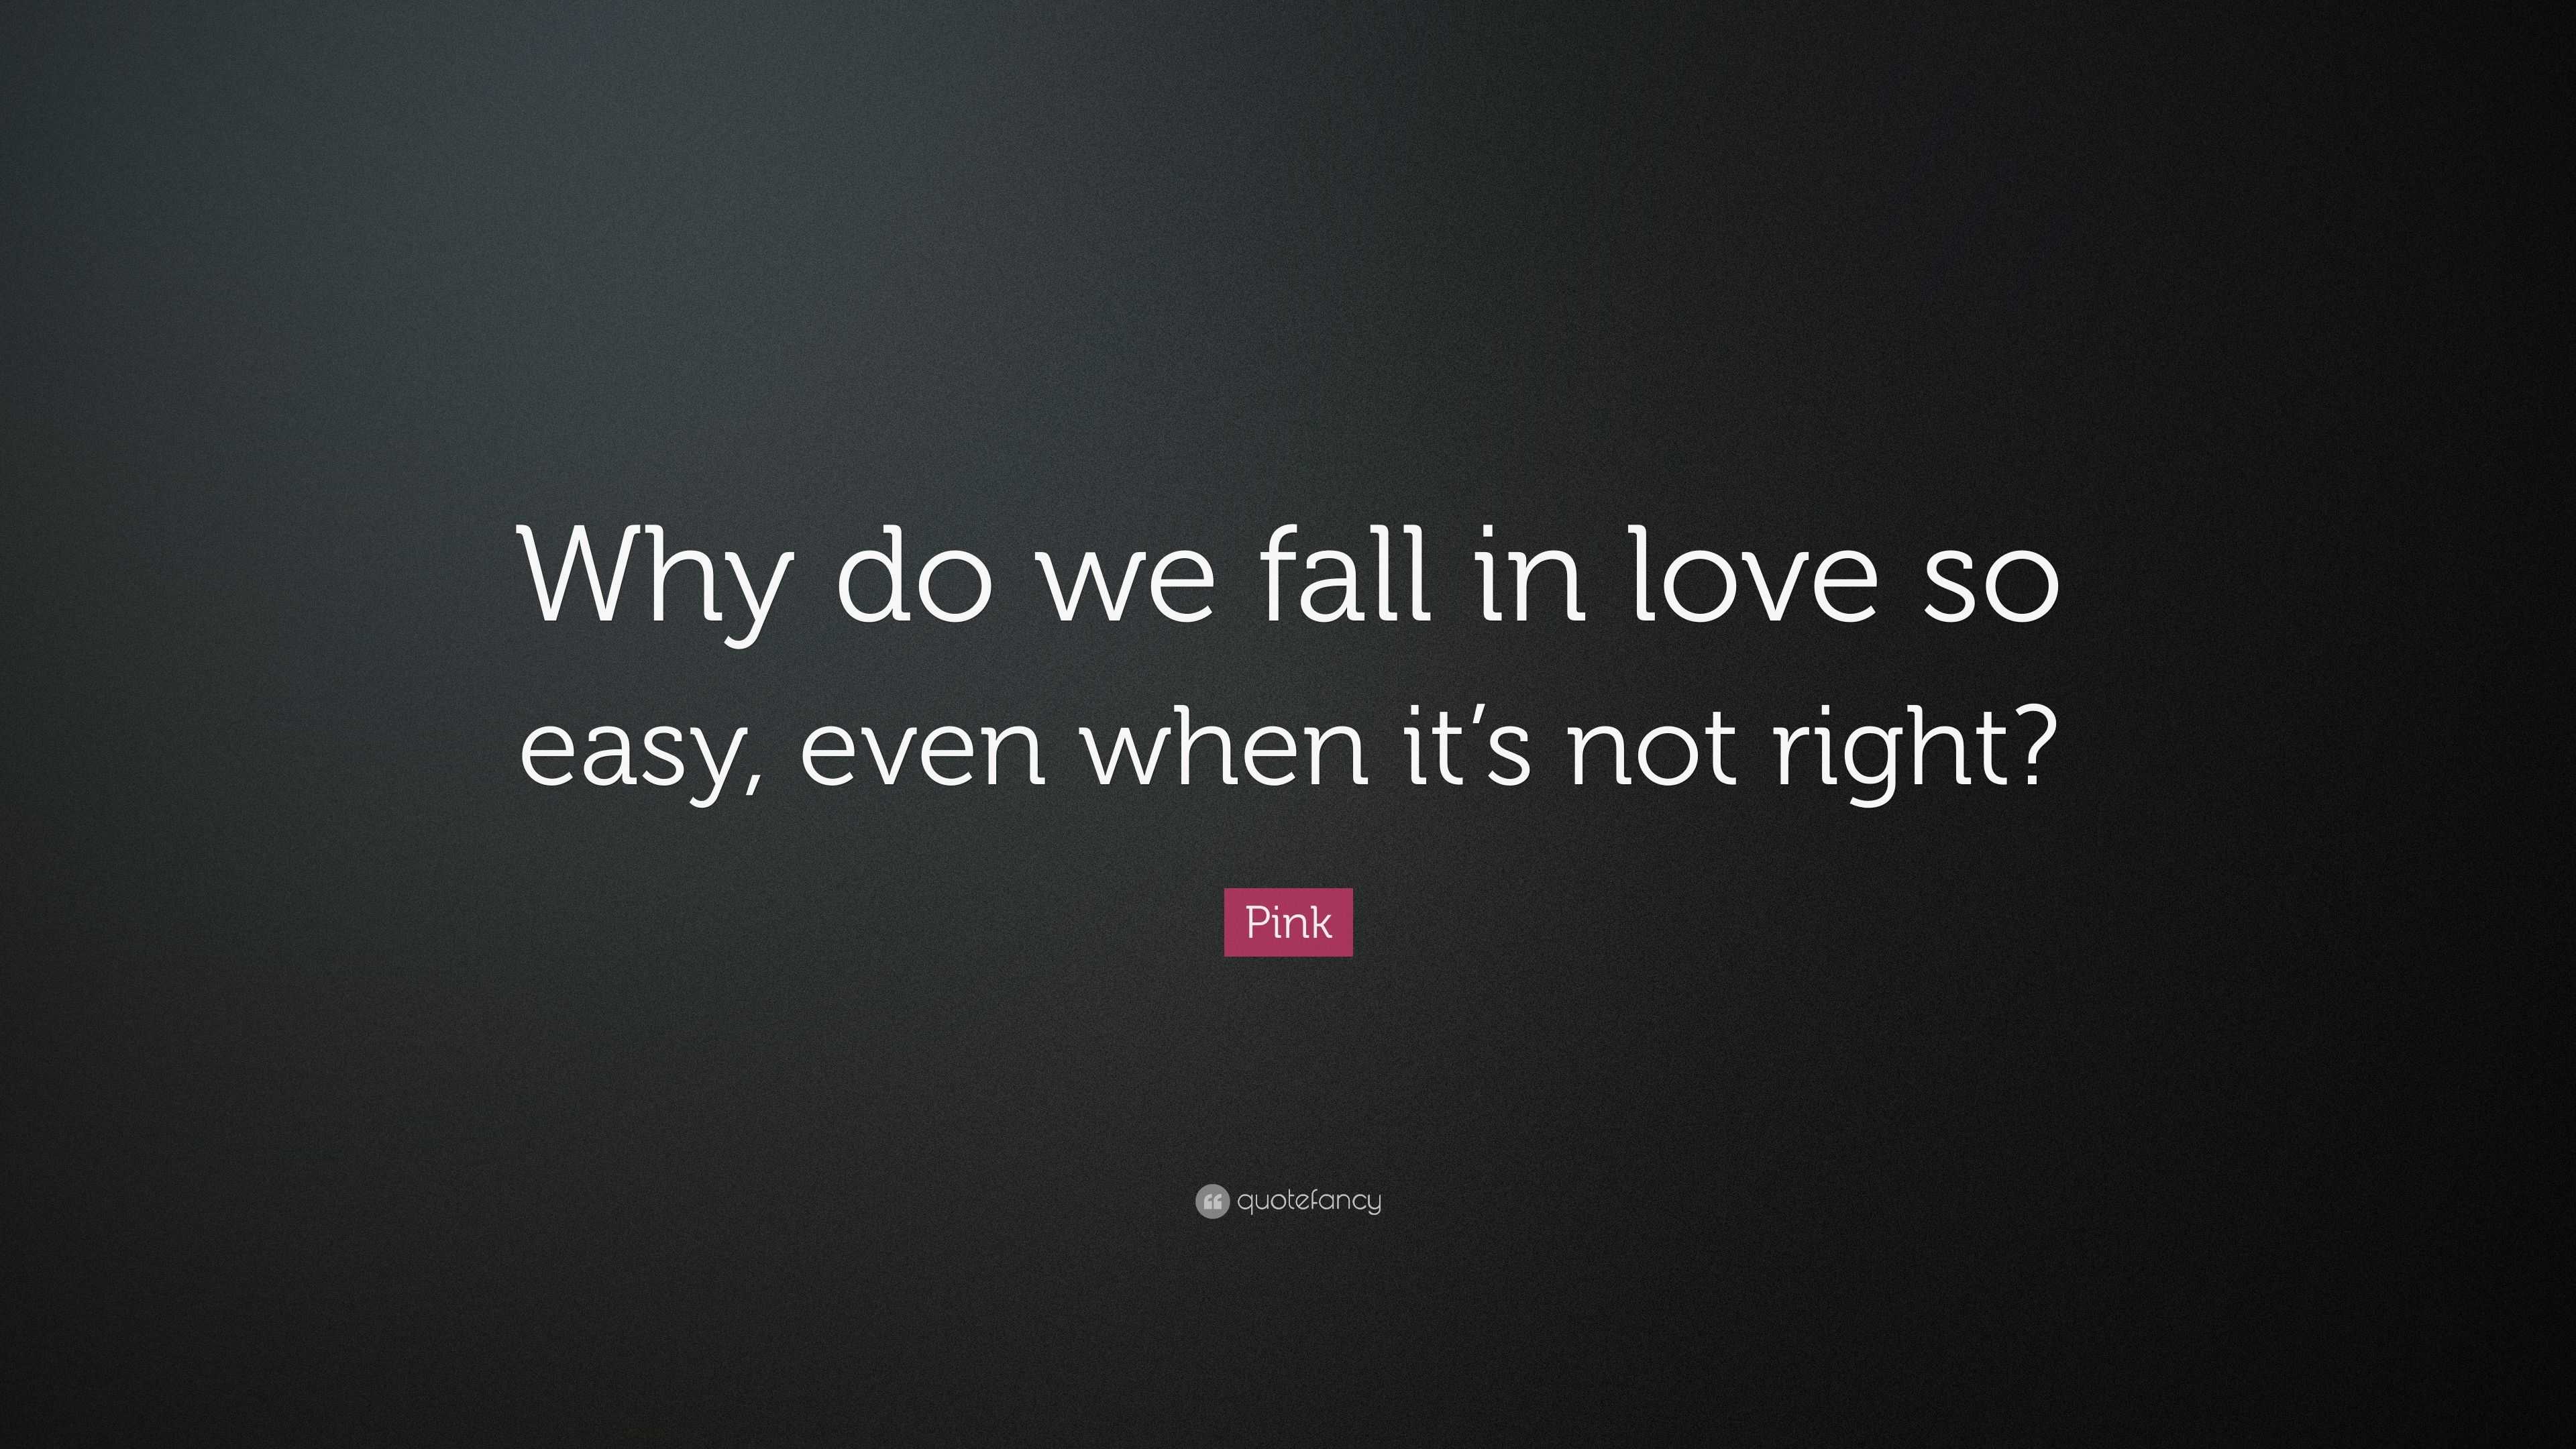 Pink Quote “Why do we fall in love so easy even when it s